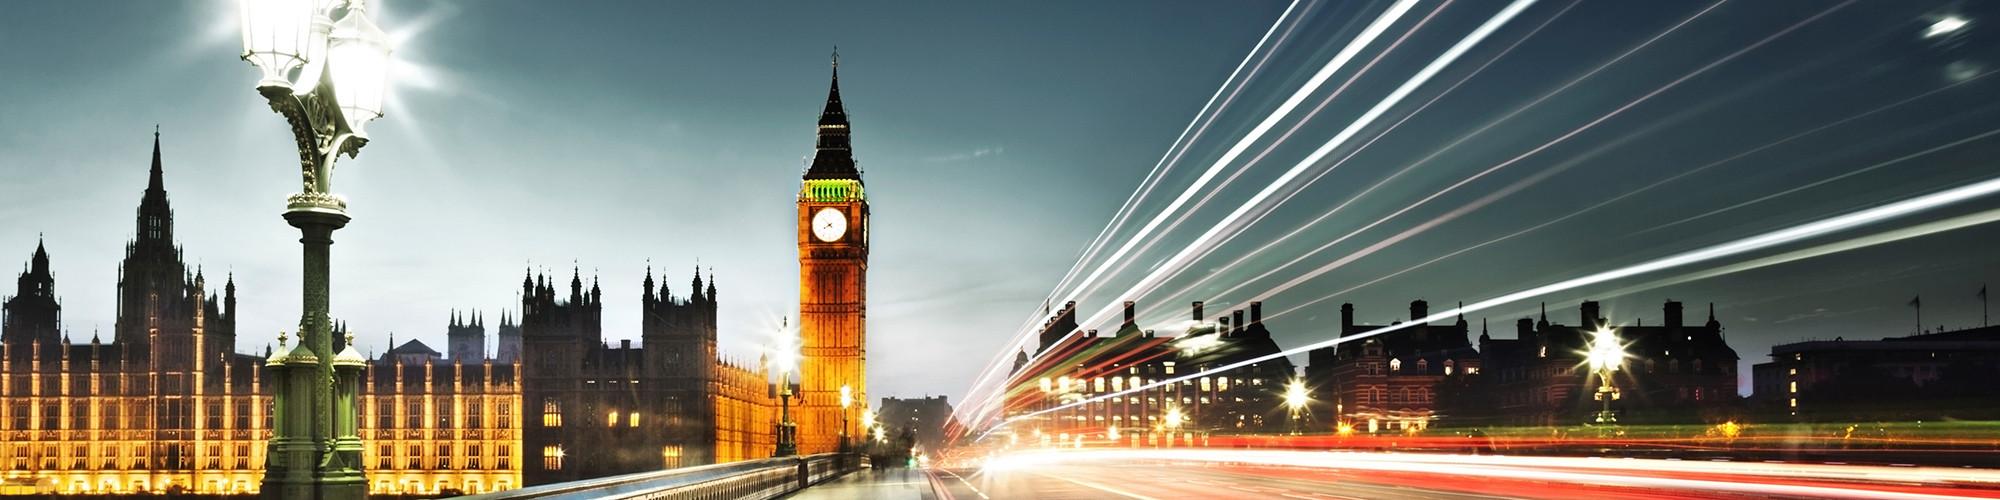 london to europe tour packages